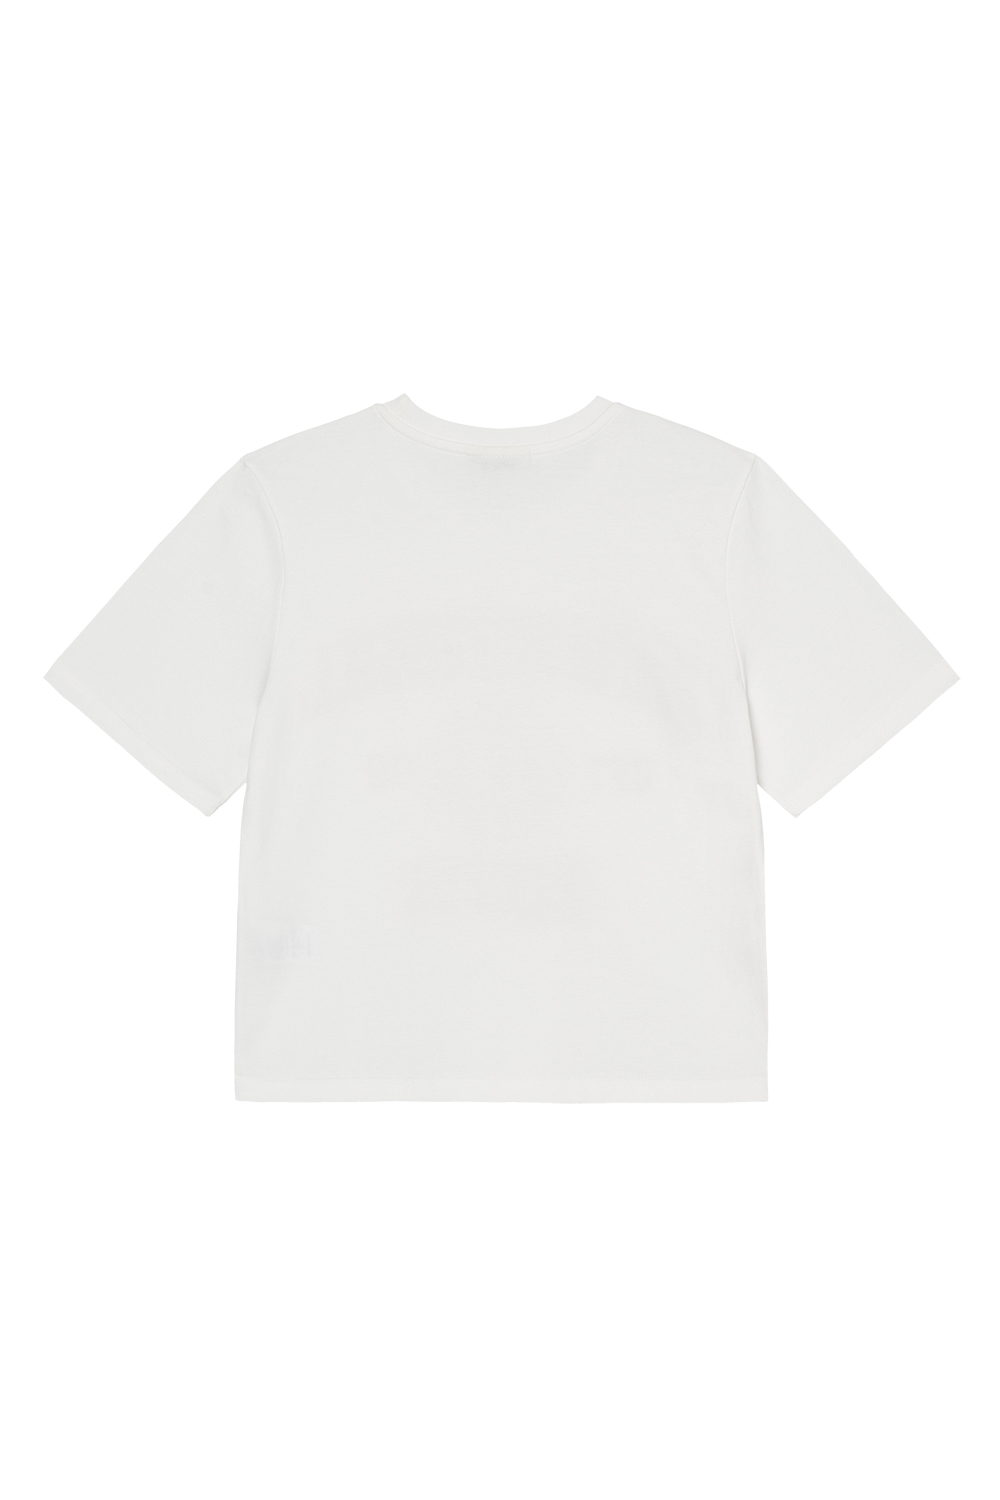 W NEW NORMAL T-SHIRTS WHITE